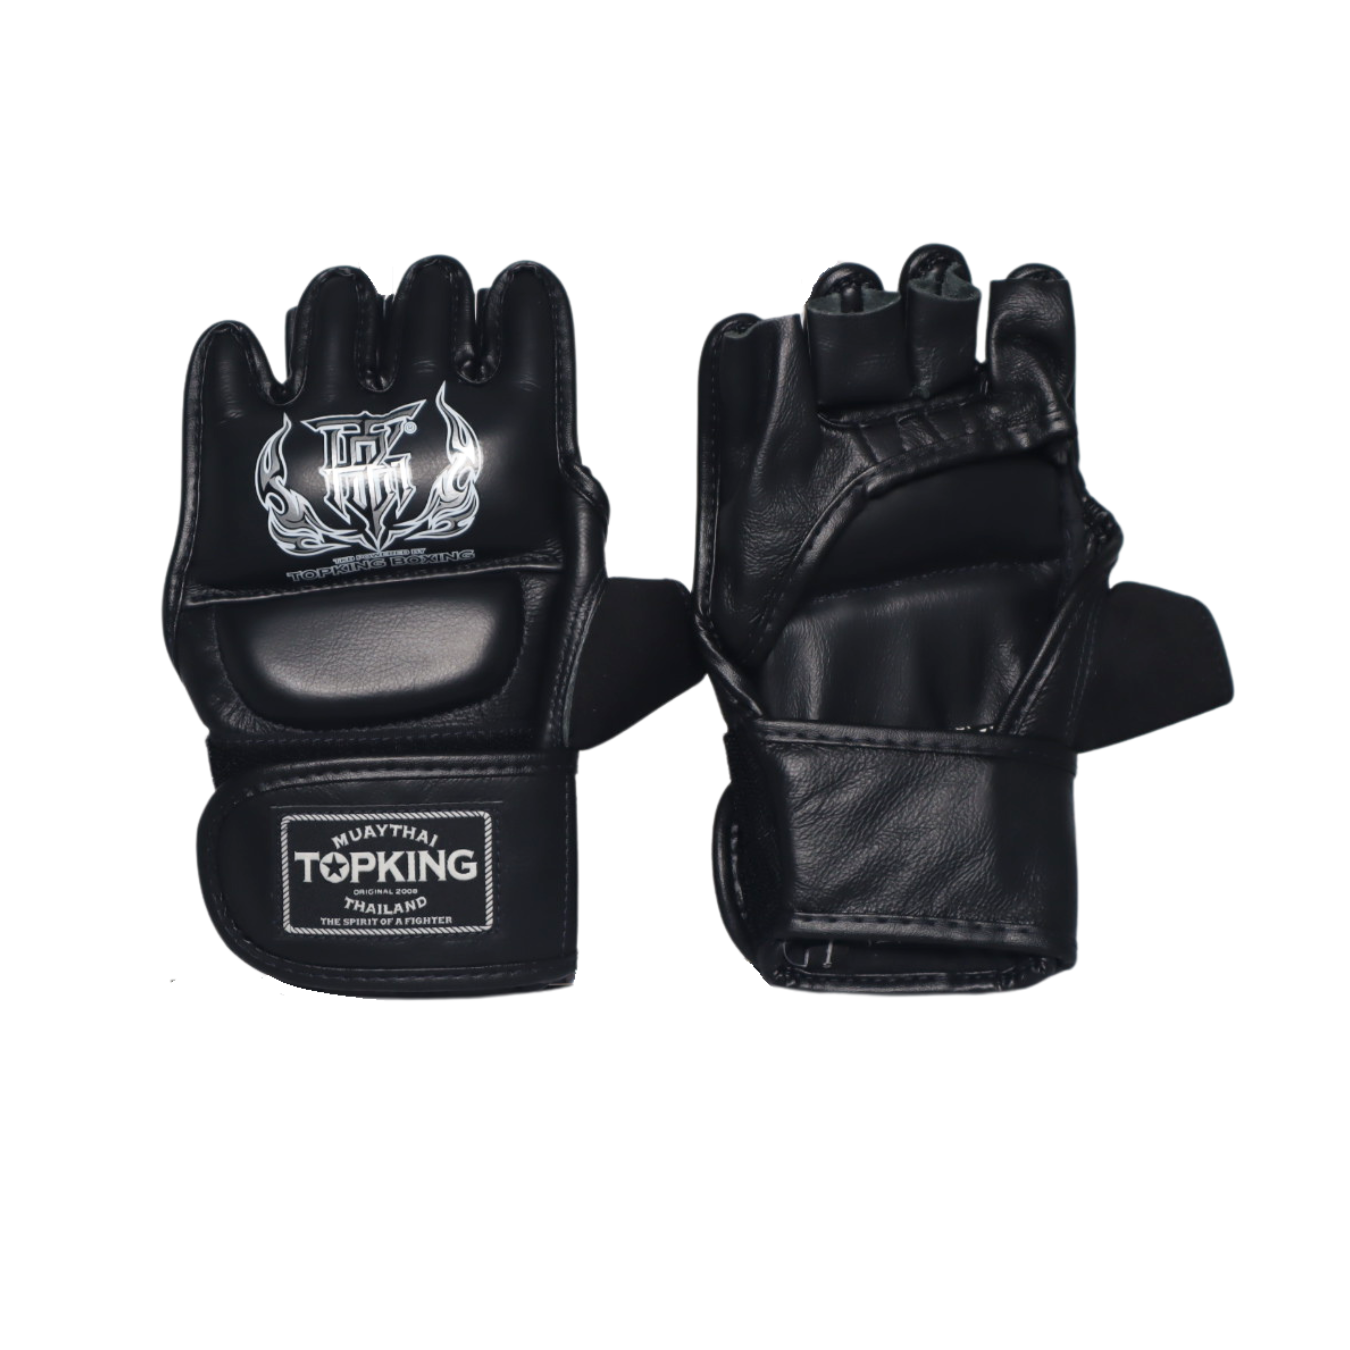 Top King ULTIMATE Grappling MMA Gloves